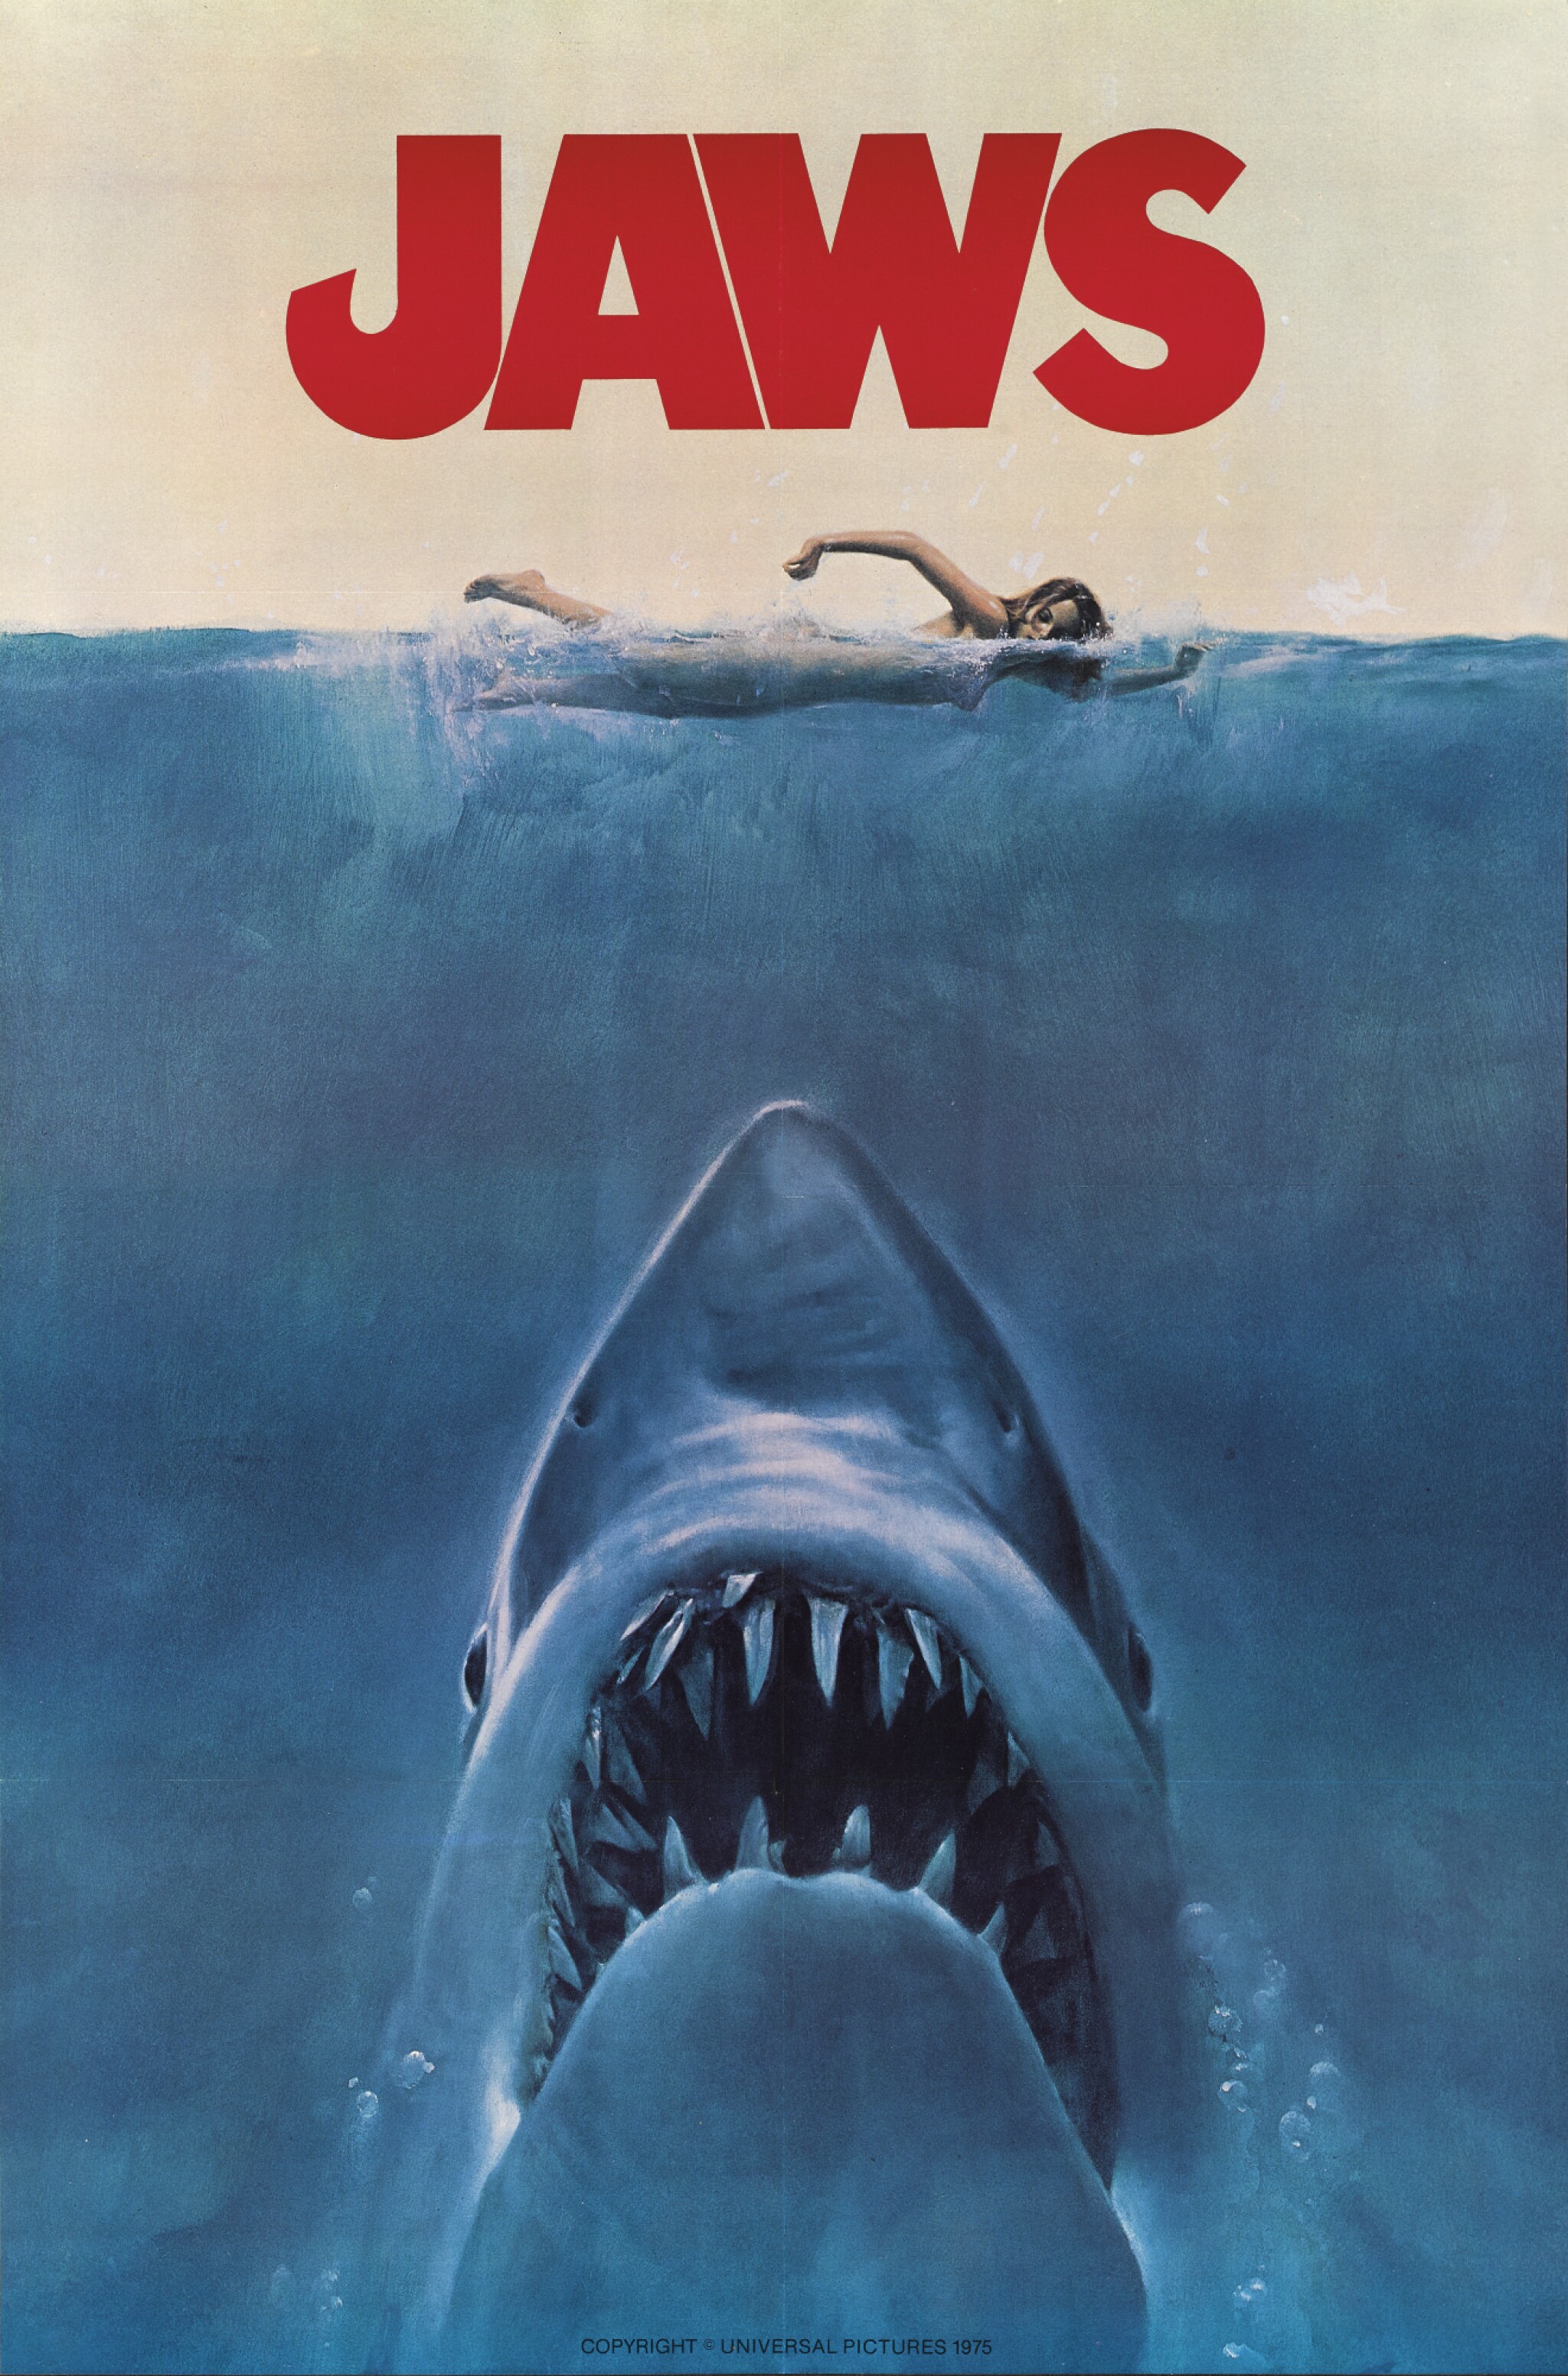 Jaws movie poster depicting a shark facing upward toward a swimmer. The word JAWS is written in red above the diver.